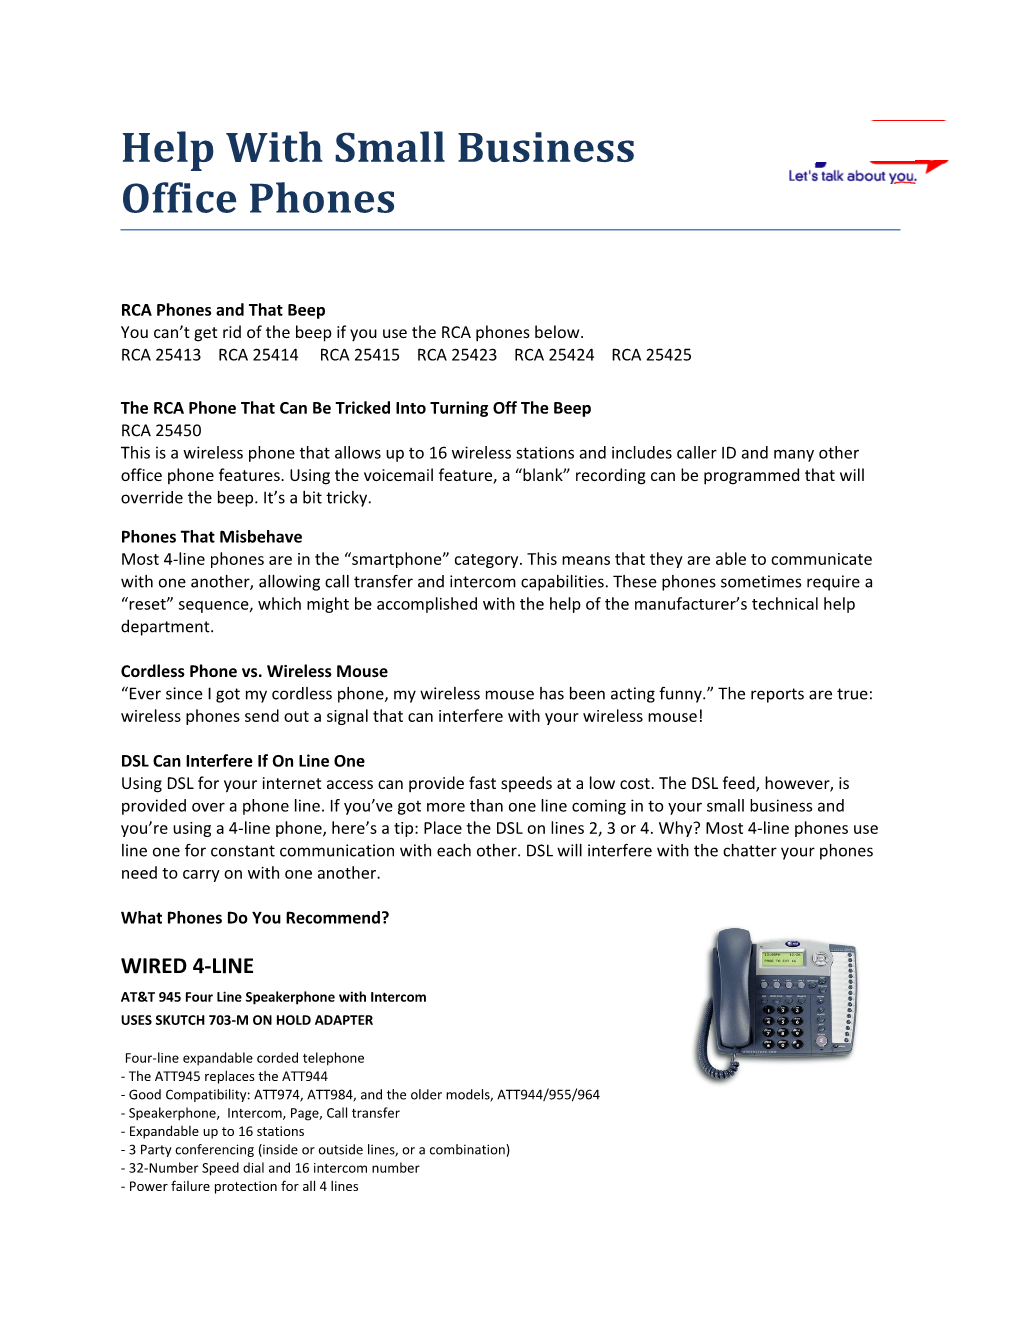 Help with Small Business Office Phones